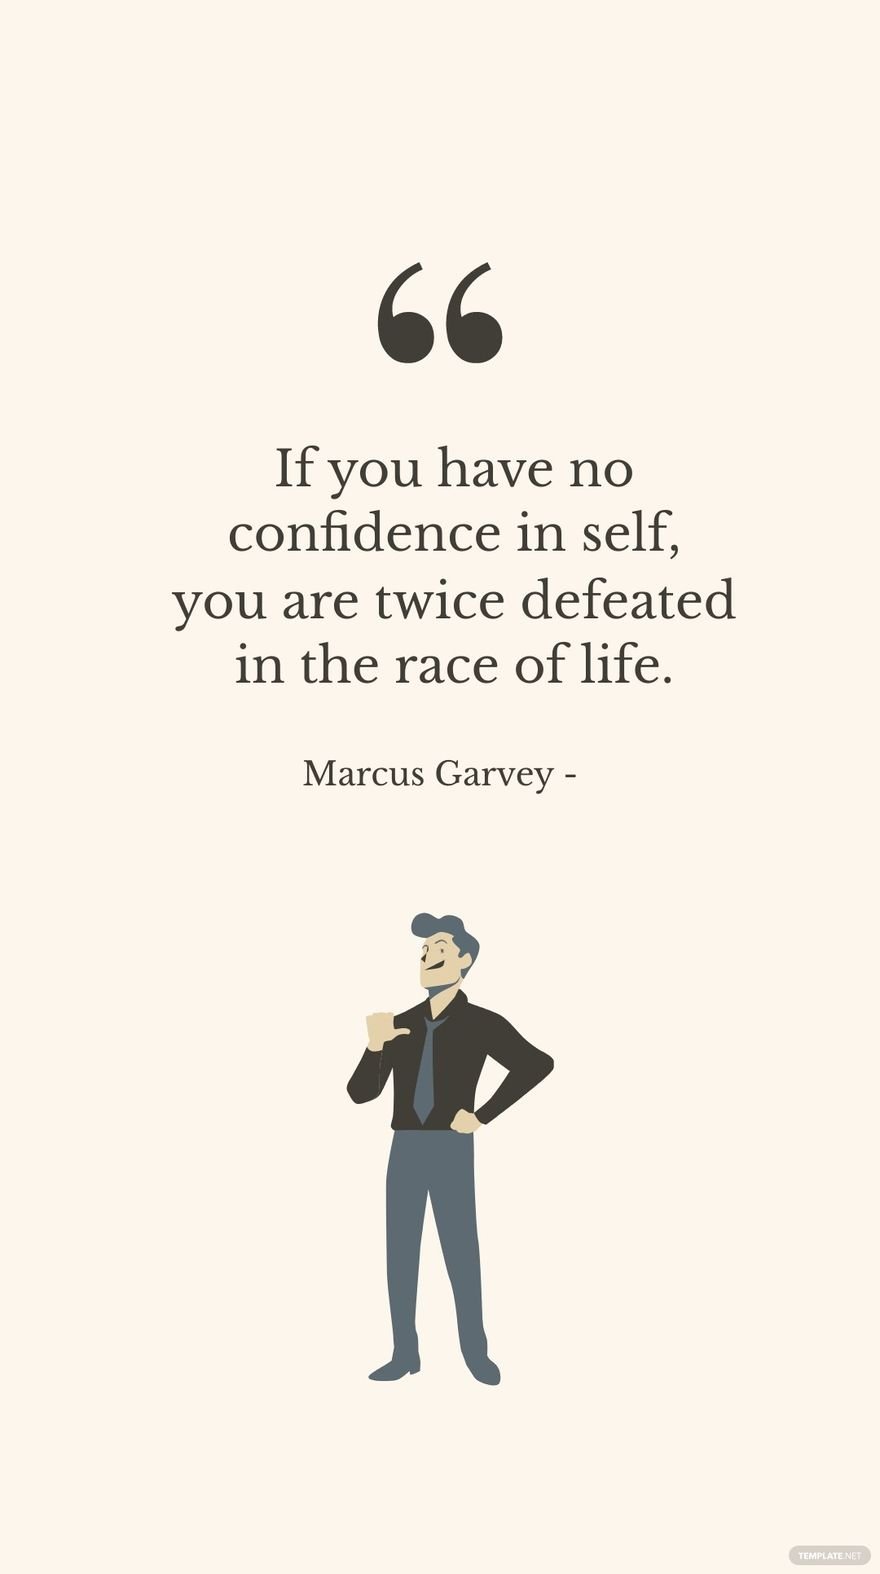 Marcus Garvey - If you have no confidence in self, you are twice defeated in the race of life.